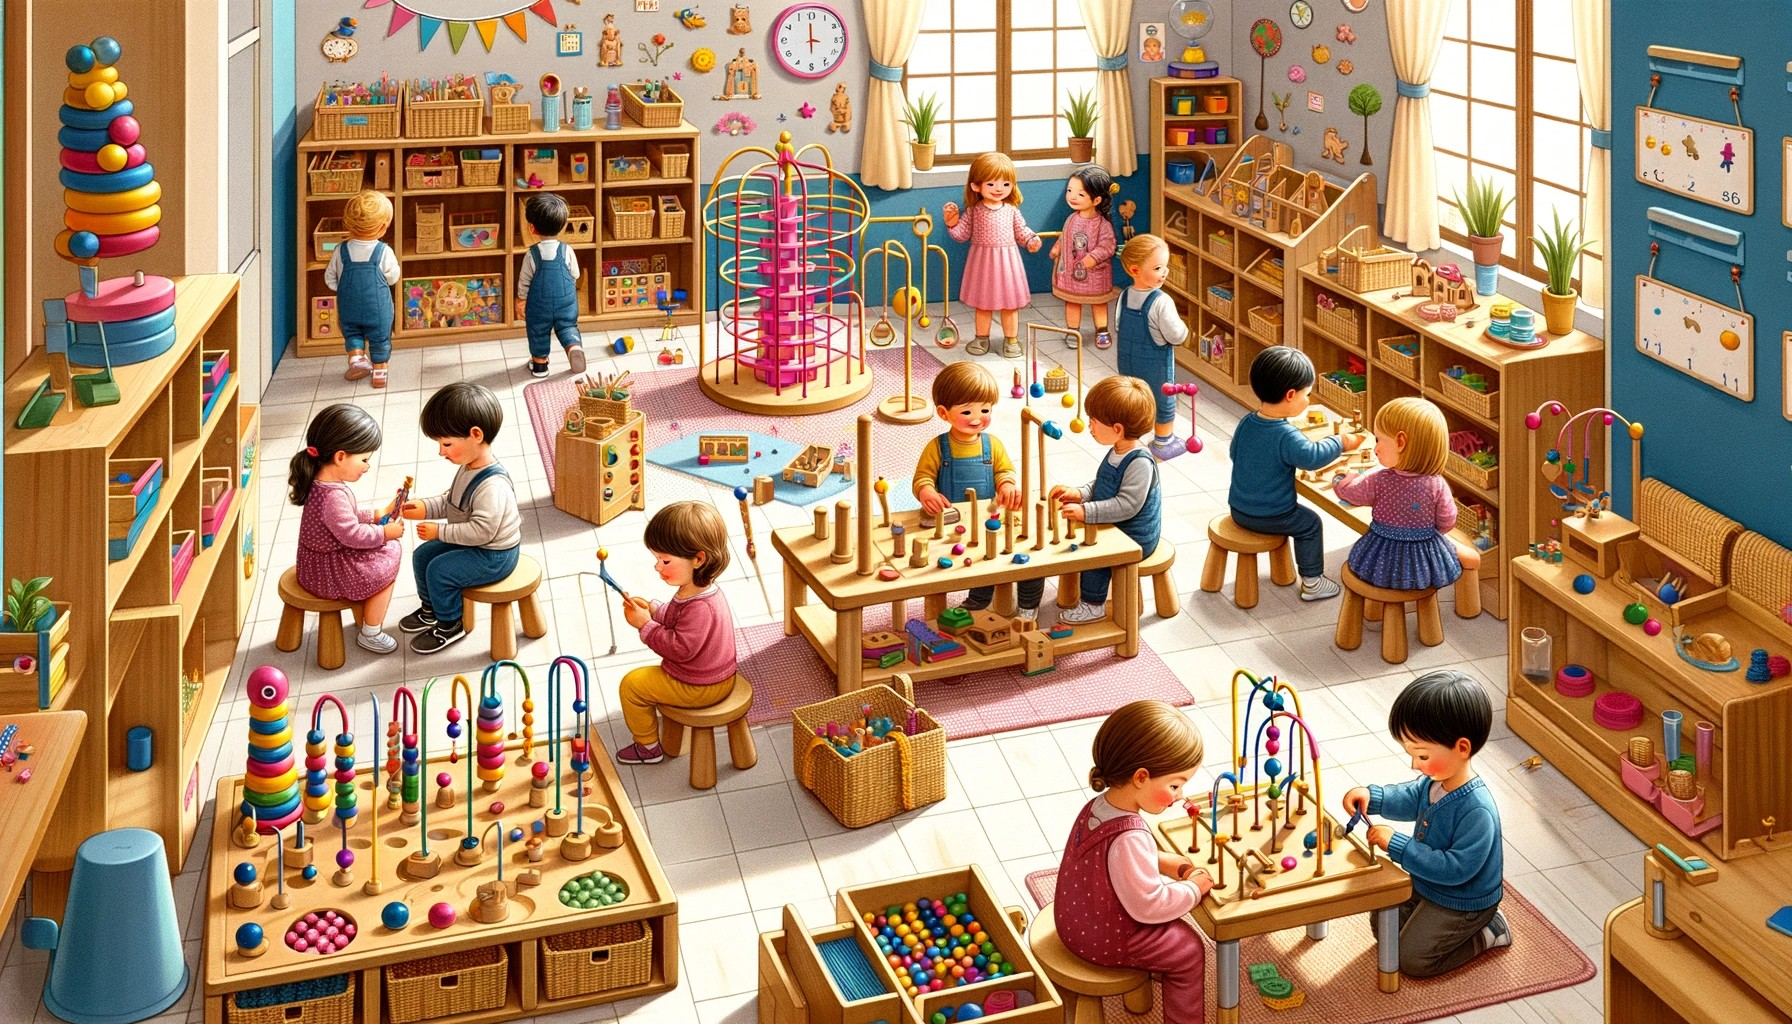 Montessori classroom with children of various ages actively engaged in using different Montessori materials. The scene reflects a vibrant and organized learning environment filled with exploration and discovery.